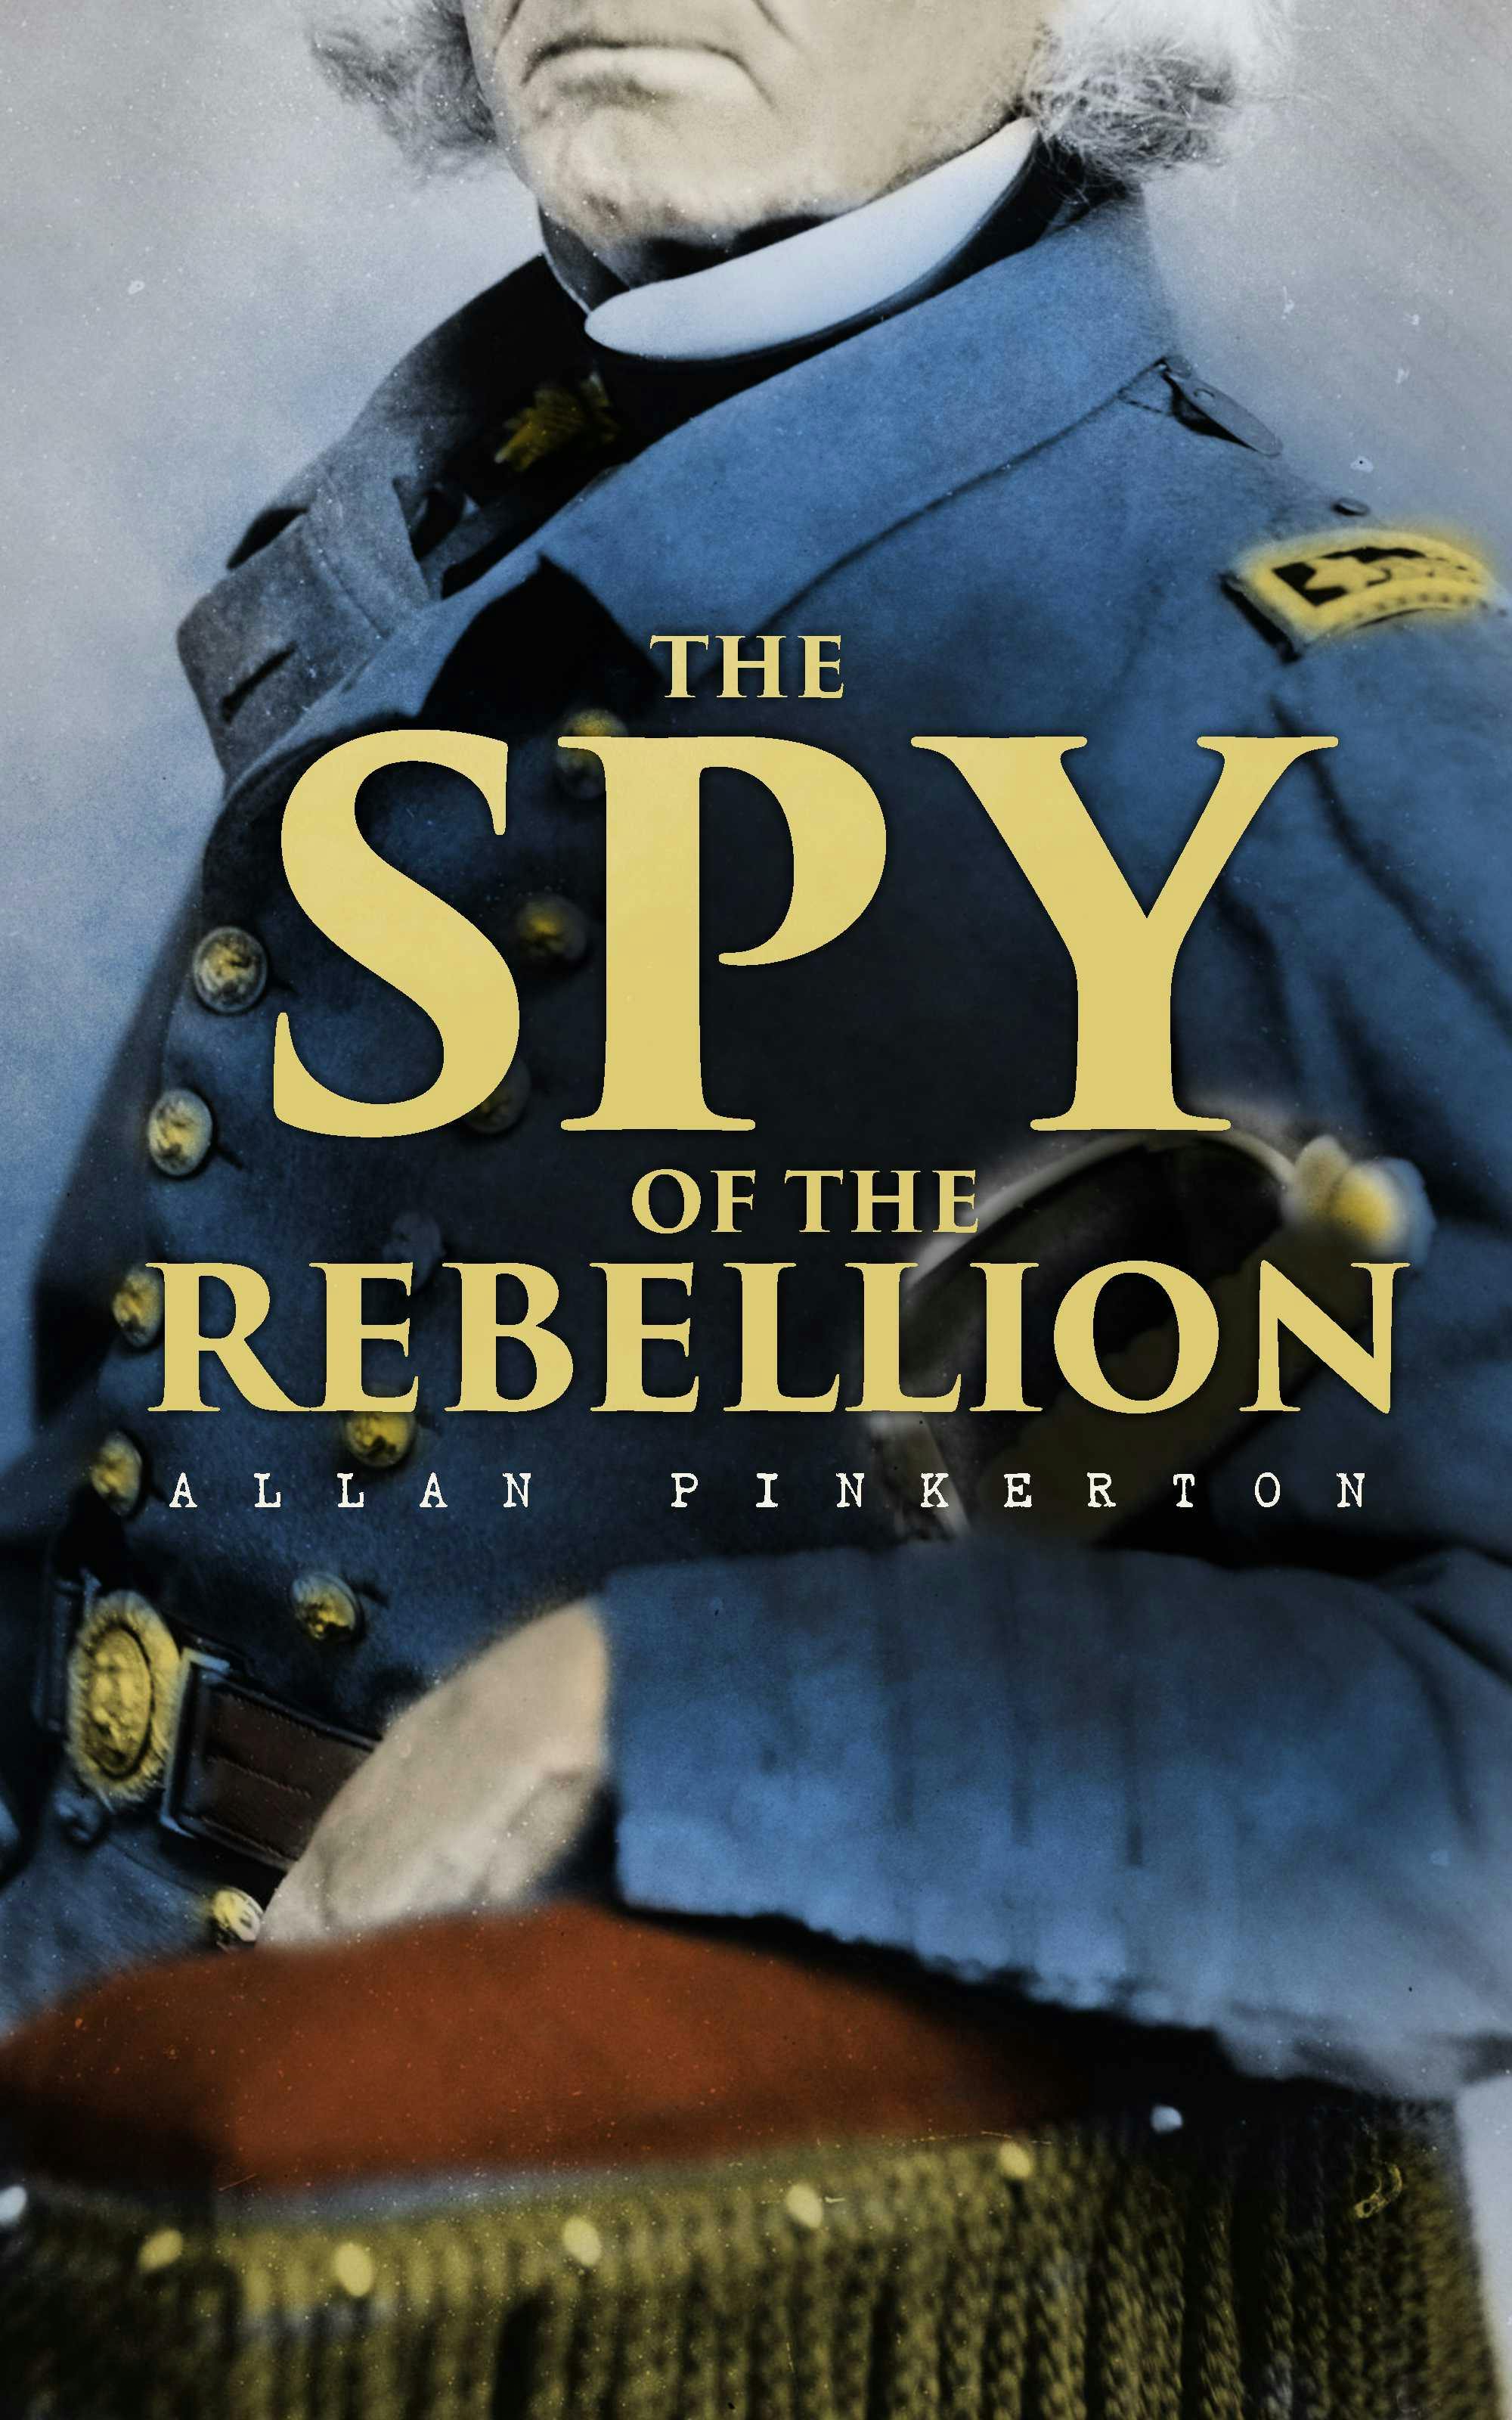 The Spy of the Rebellion: True History of the Spy System of the United States Army during the Civil War - Allan Pinkerton